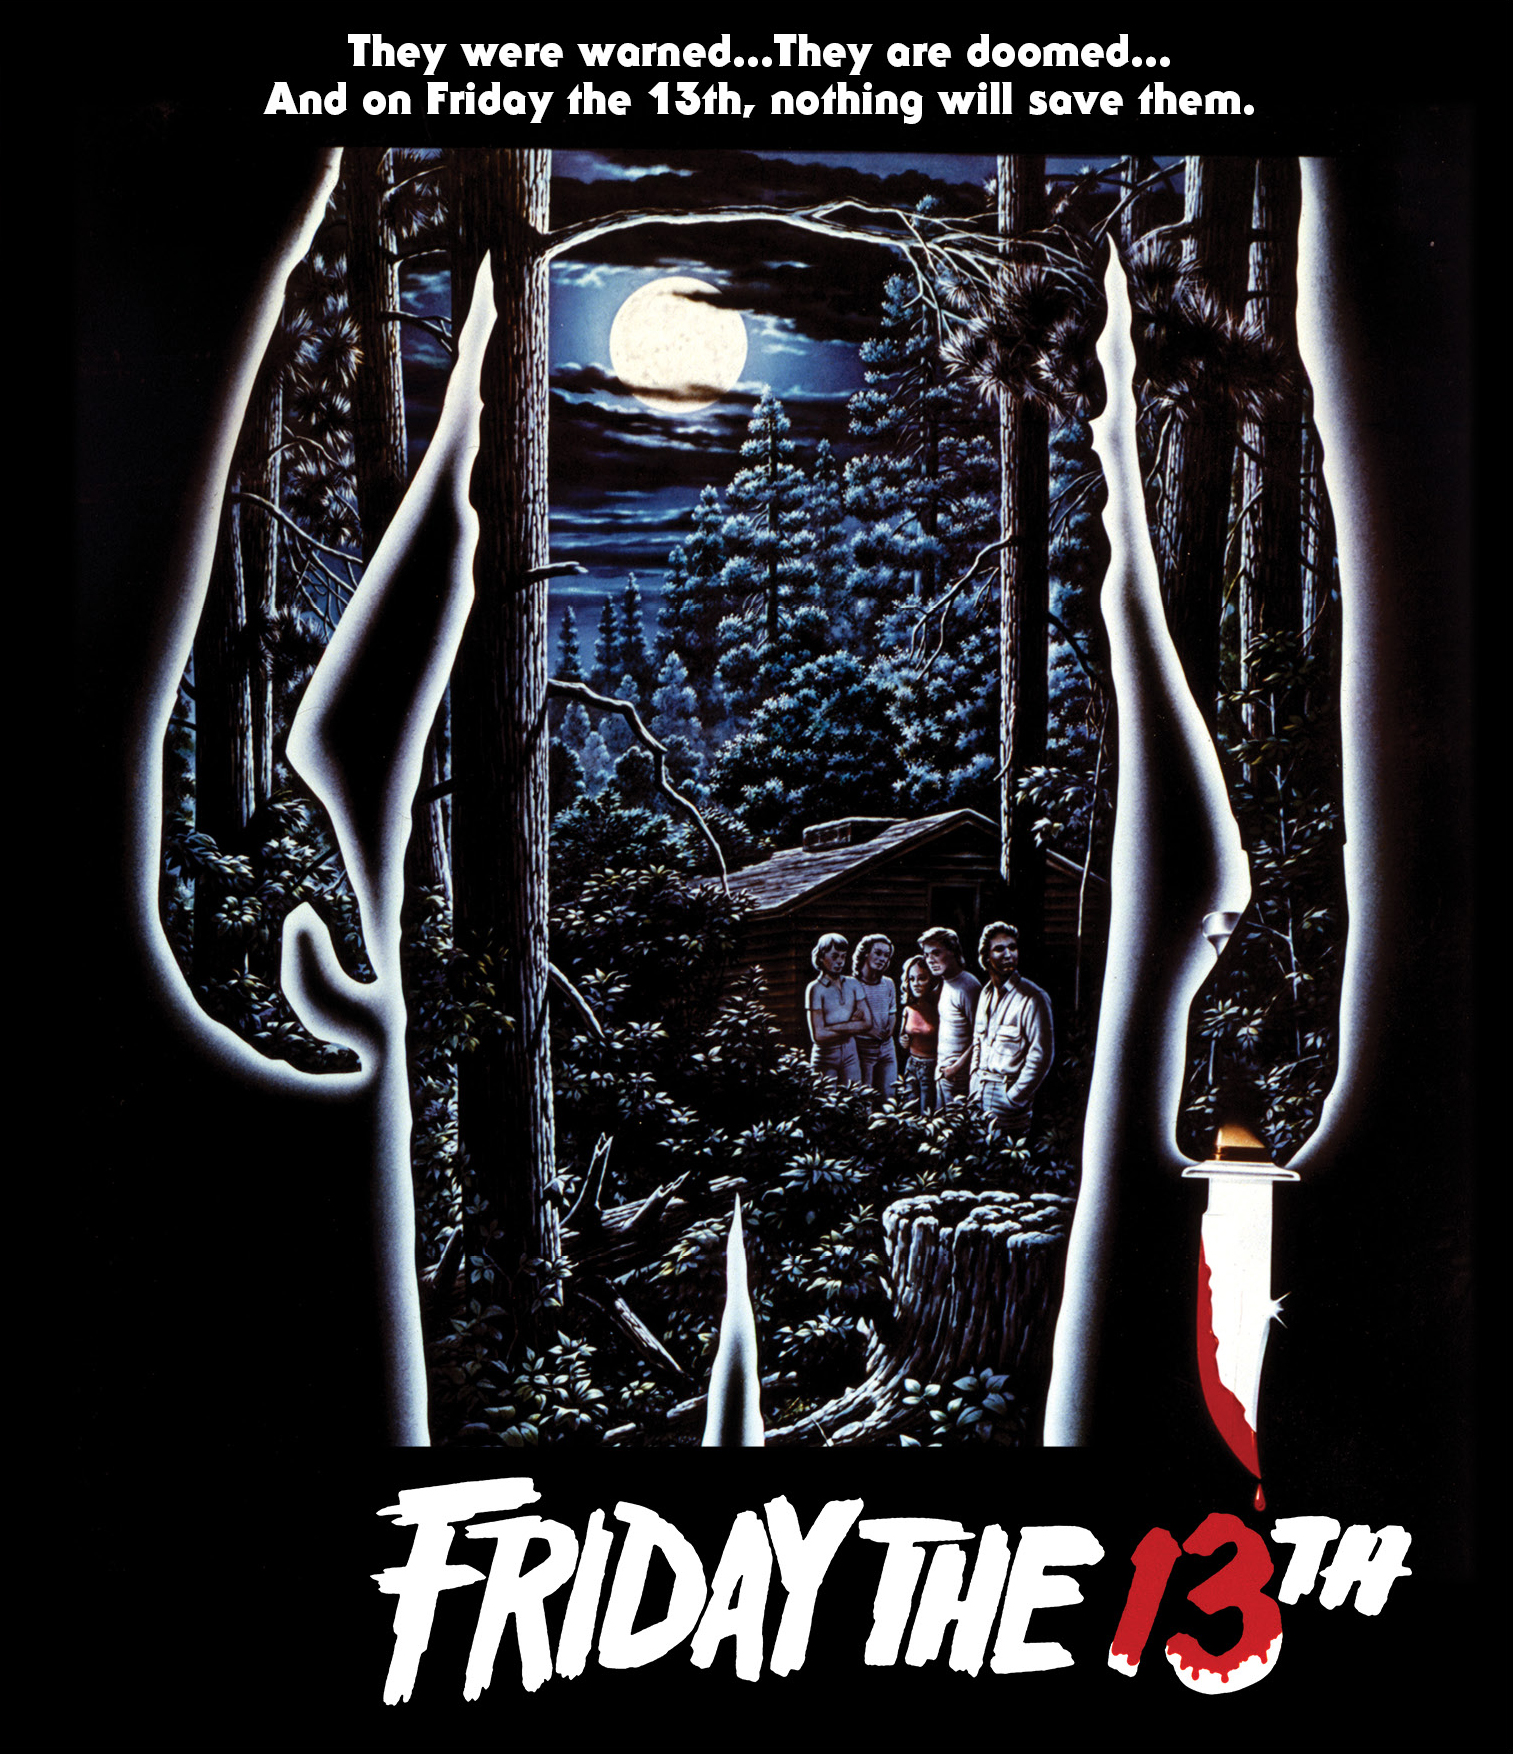 Friday the 13th 2009 Blu-ray Steelbook Exclusive